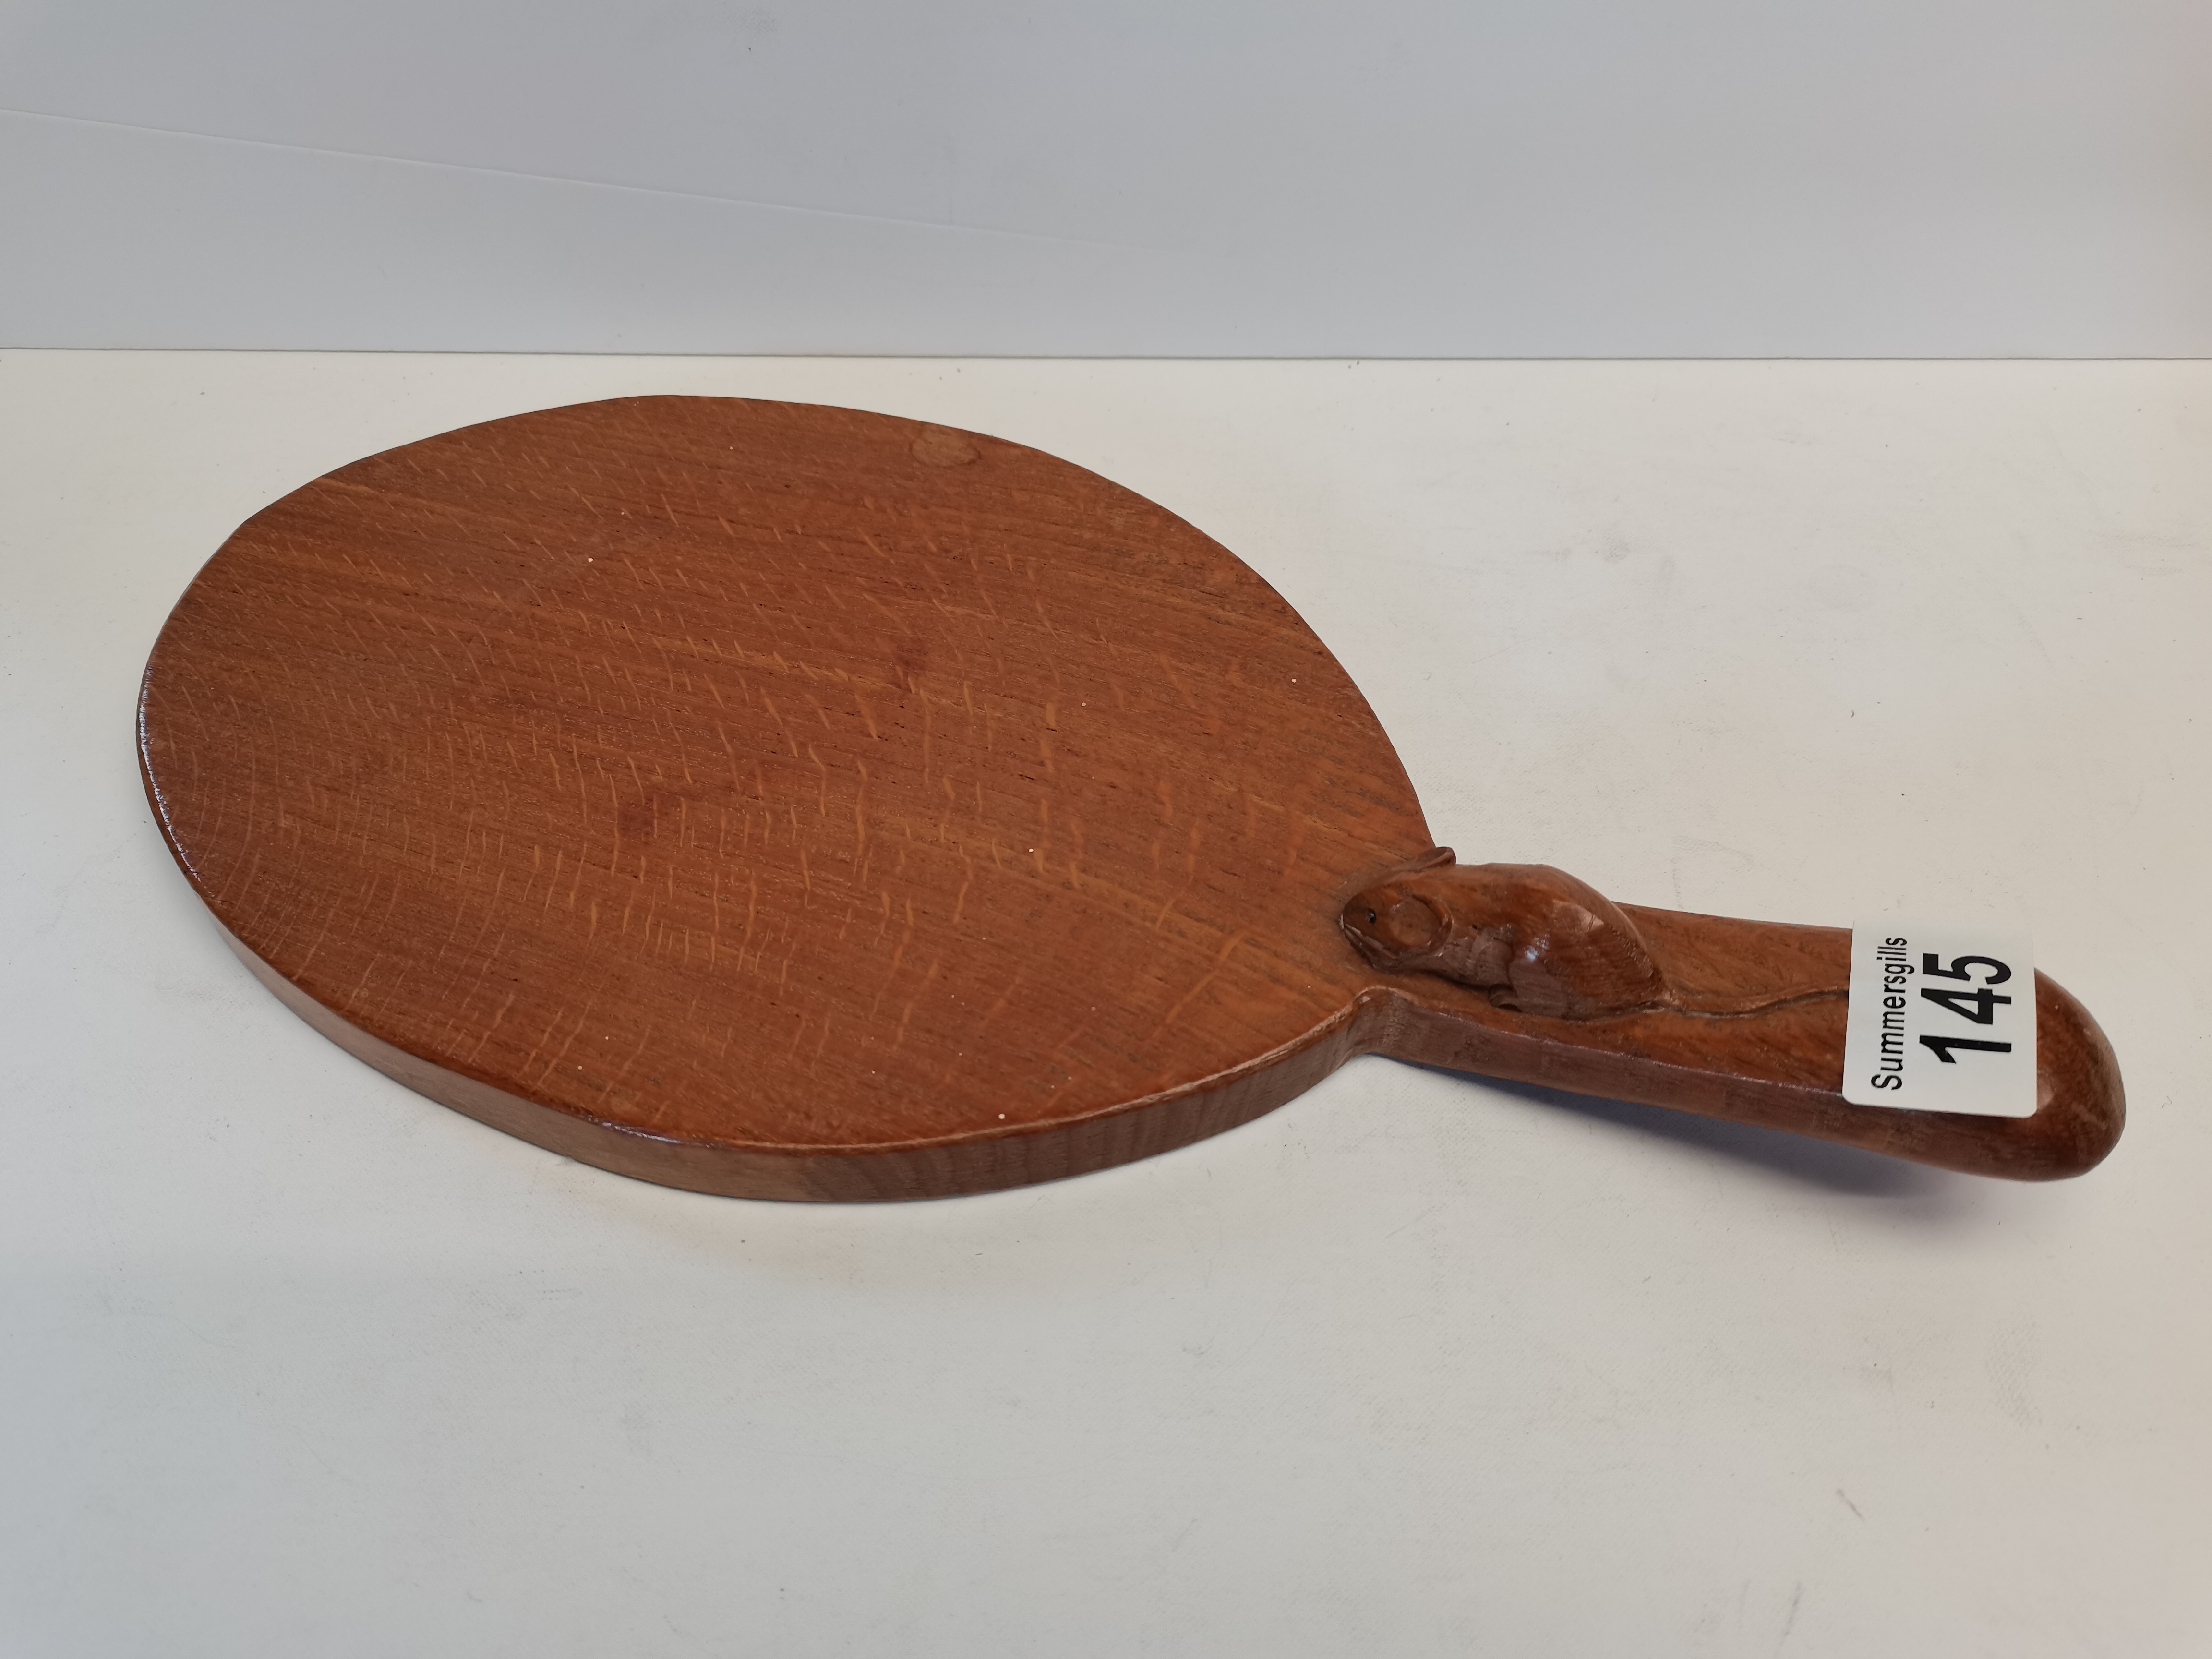 Mouseman Cheeseboard - excellent condition